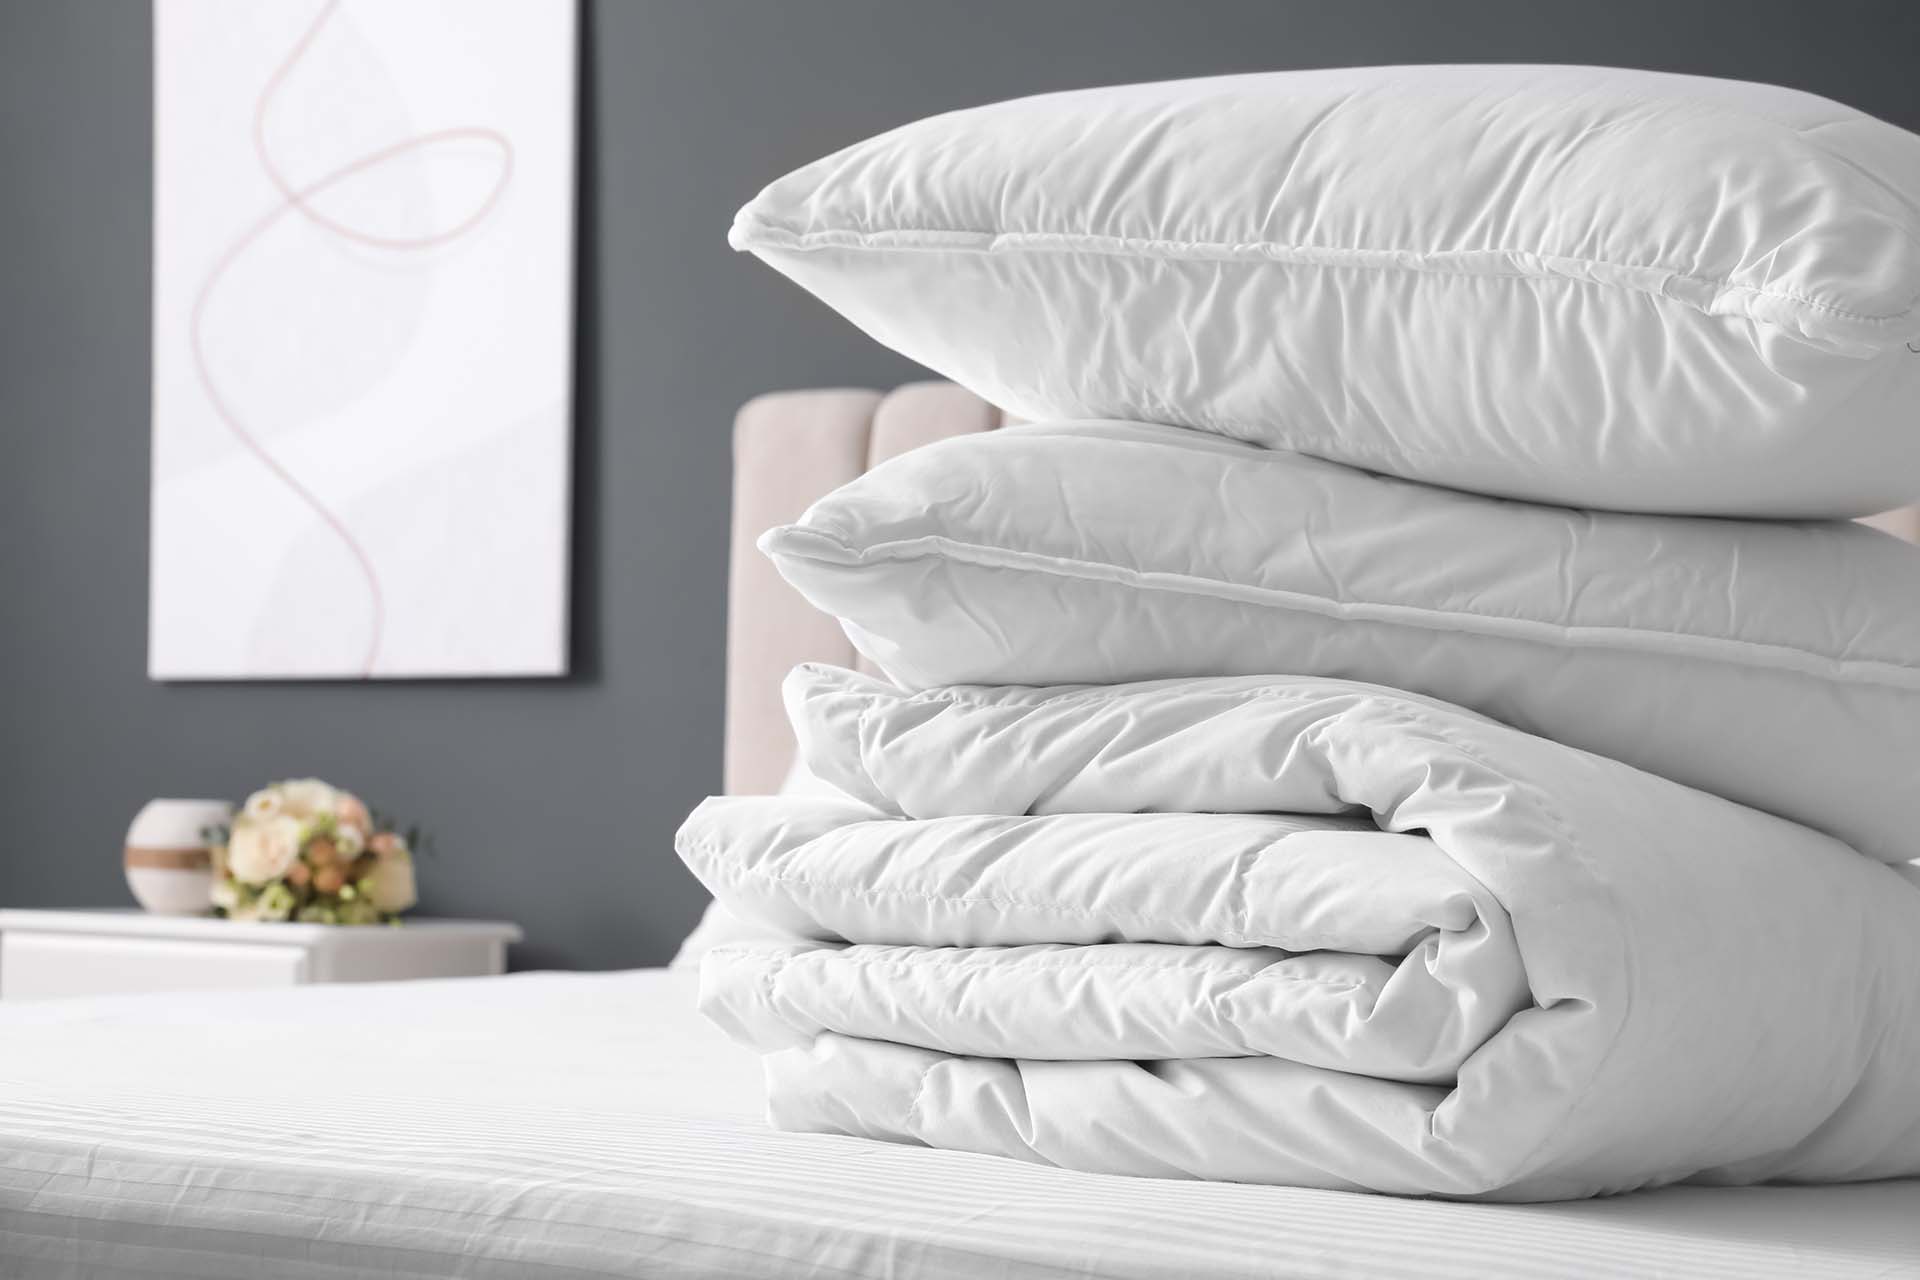 https://www.flatpriceautotransport.com/wp-content/uploads/2019/05/Soft-folded-blanket-and-pillows-on-bed-indoors-closeup.jpg